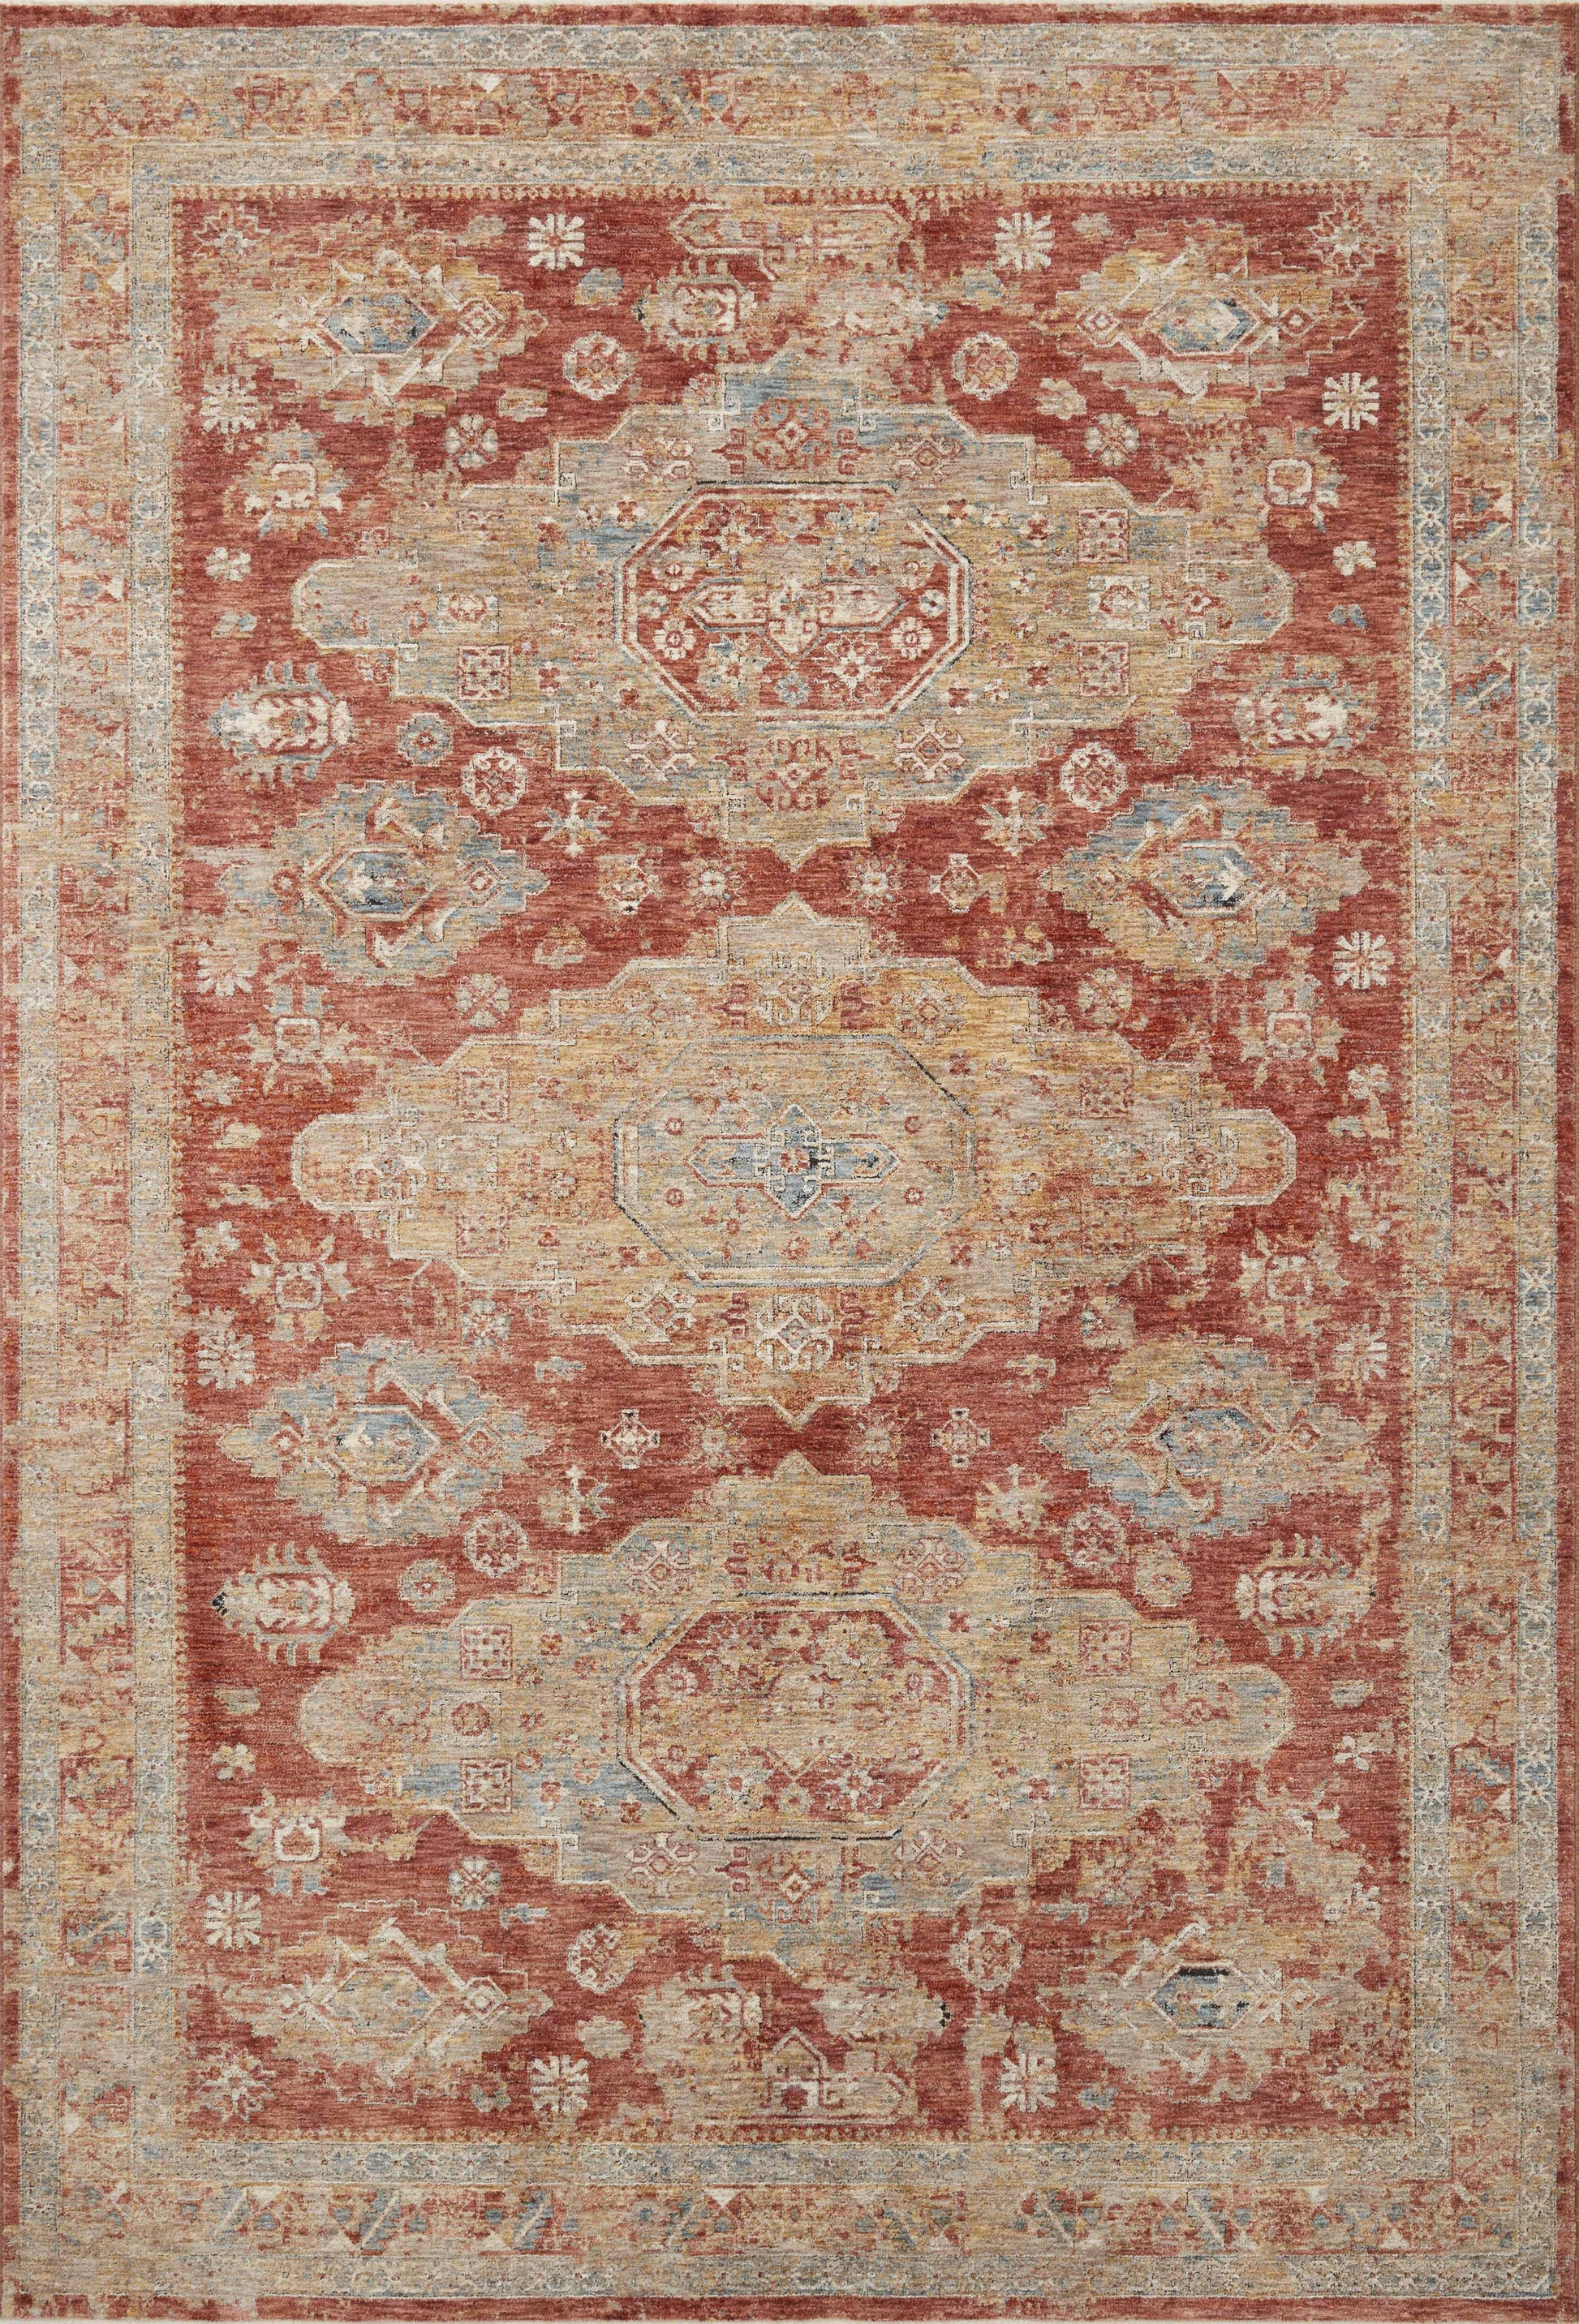 A picture of Loloi's Gaia rug, in style GAA-02, color Gold / Brick